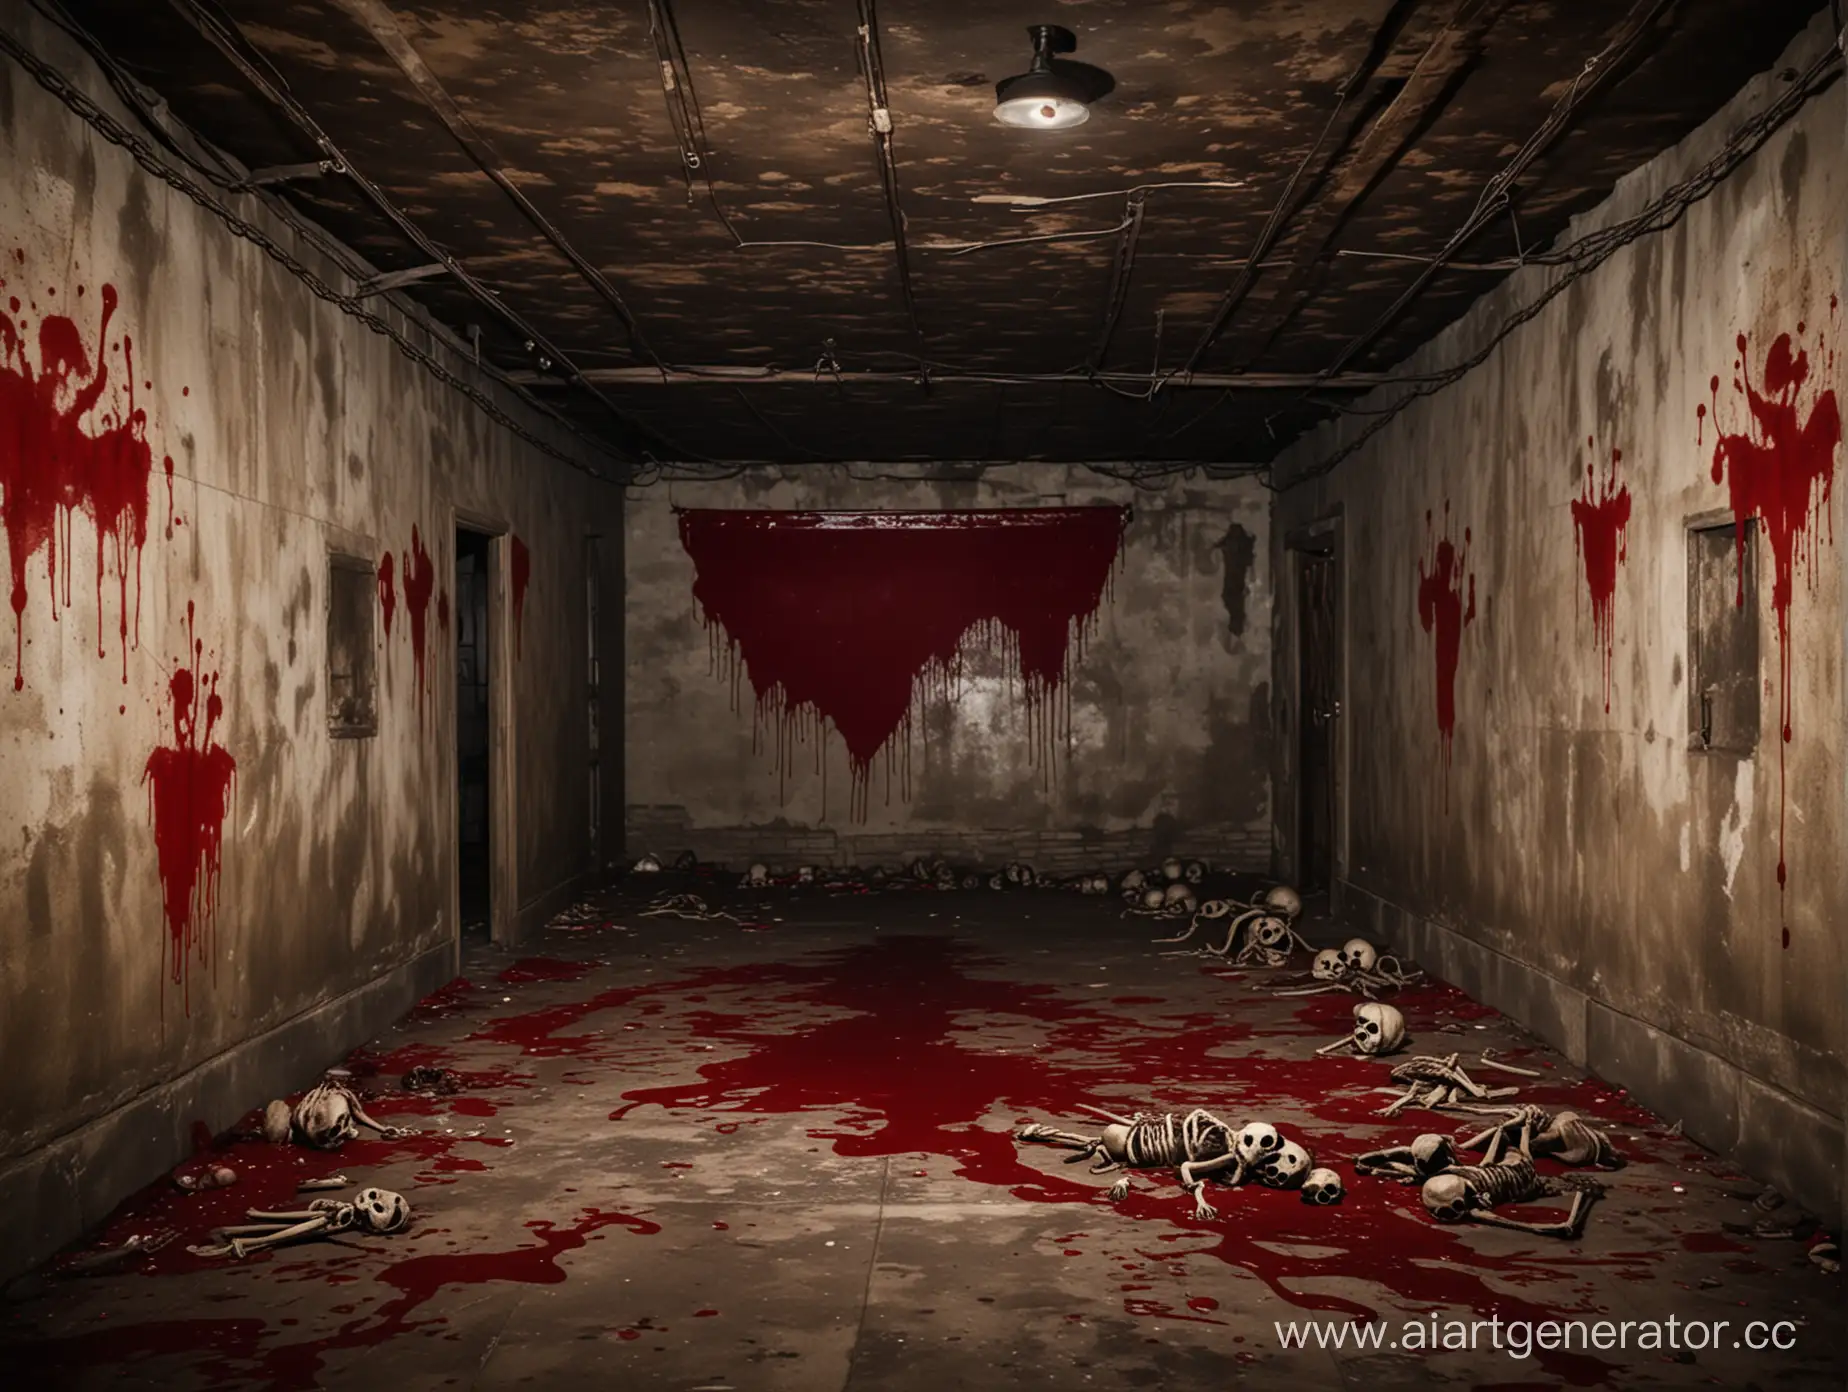 Eerie-Basement-Scene-Haunting-Mansion-Ambiance-with-Blood-and-Skeletons